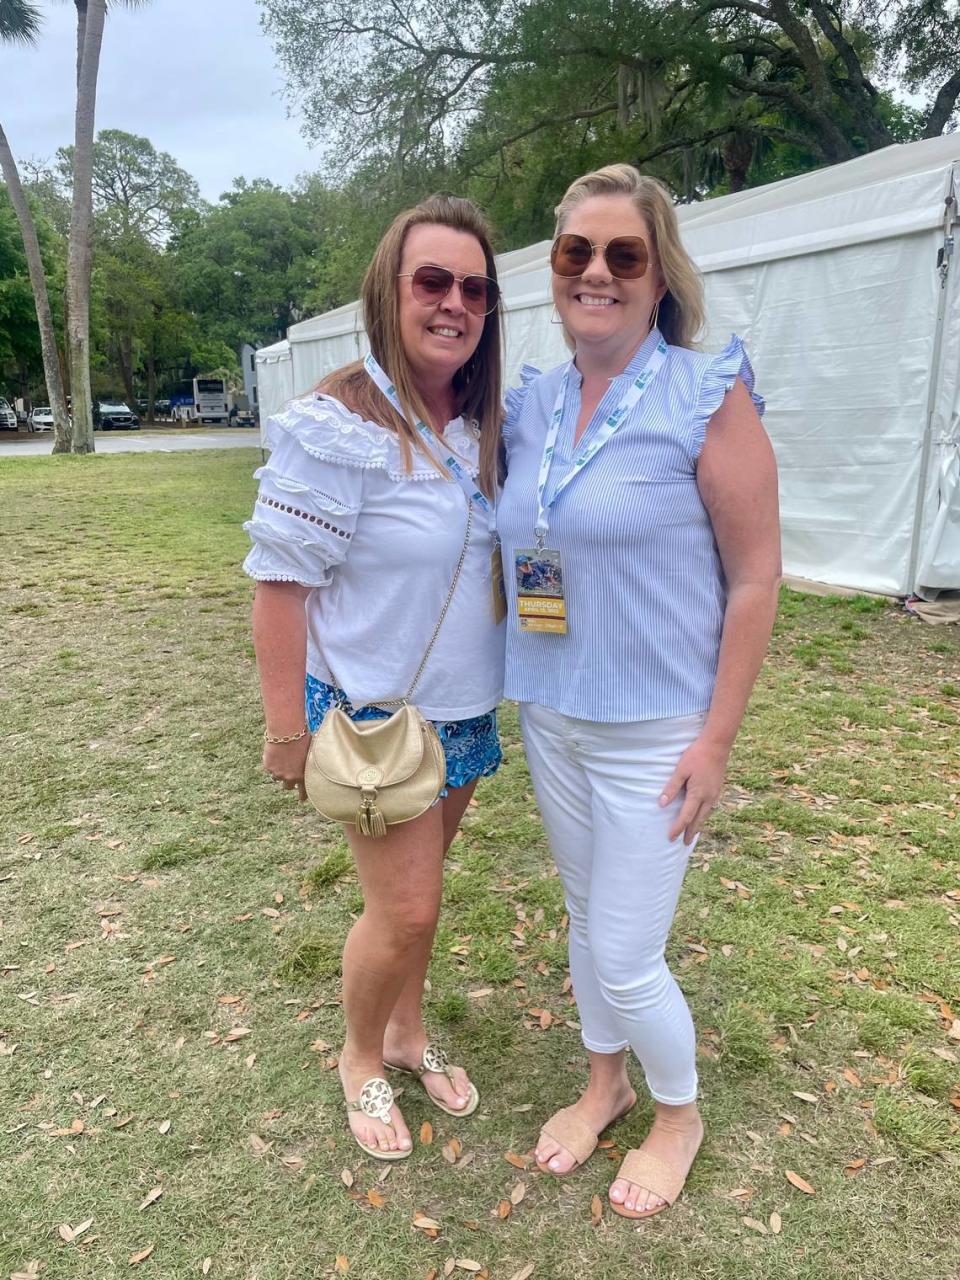 Beth and Theresa Hanning pose for a picture in Harbour Town after getting off of a trolley. The two women came to Hilton Head Island from New York to attend this year’s RBC Heritage Presented by Boeing.